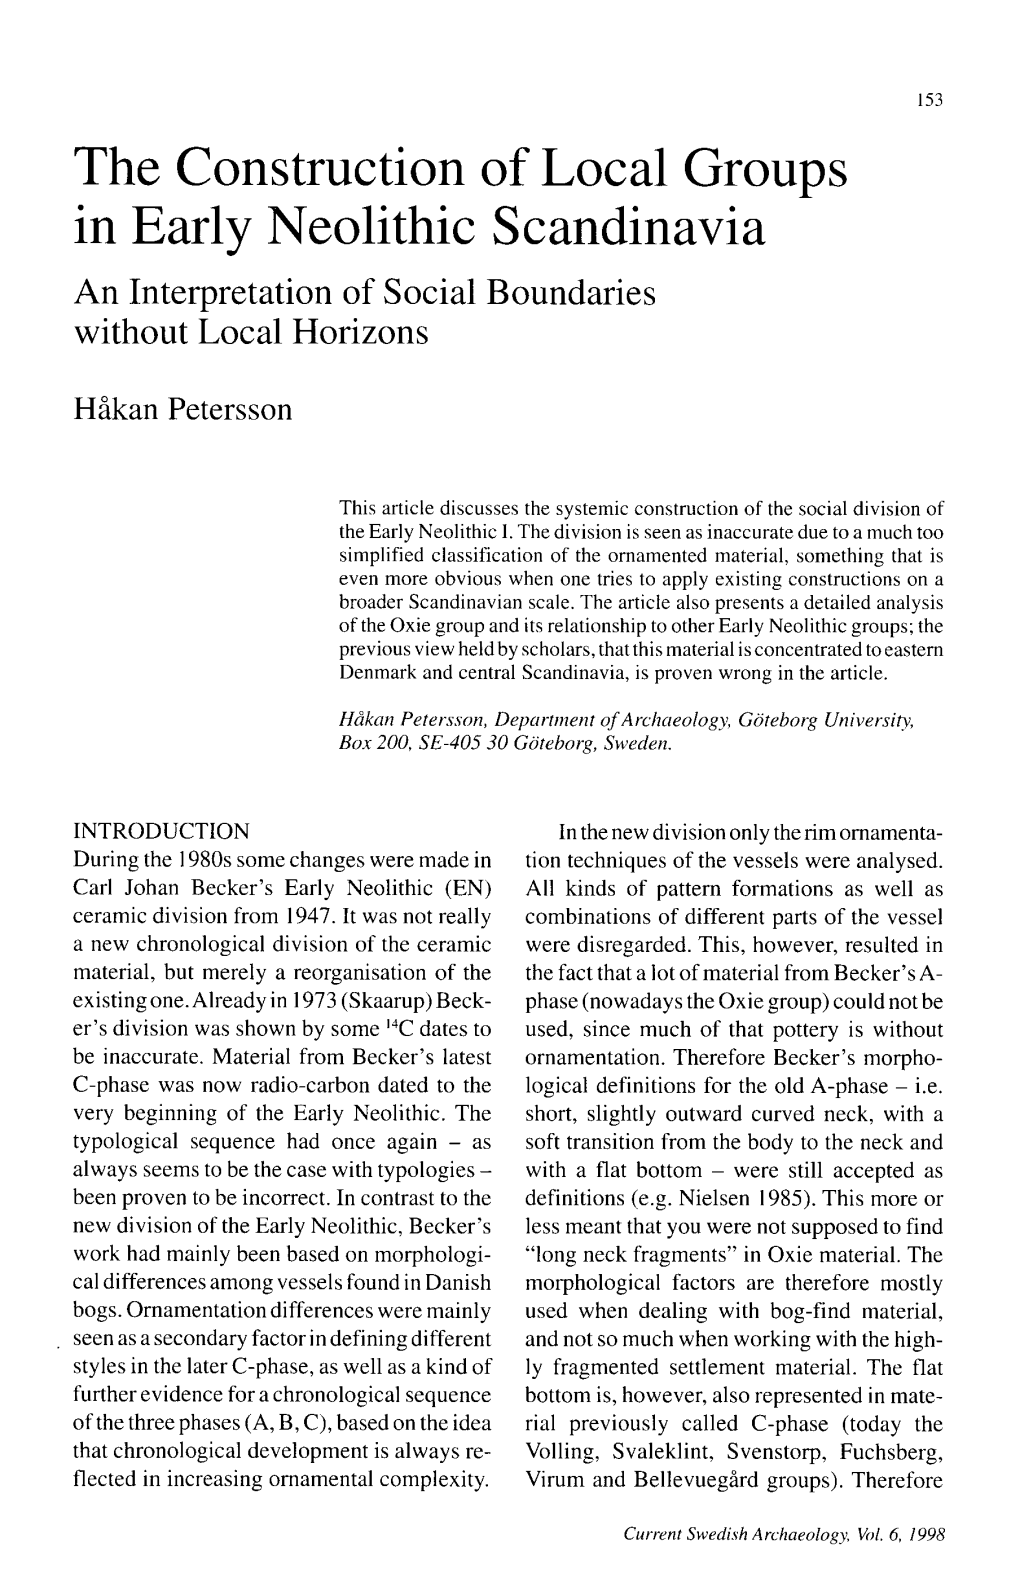 The Construction of Local Groups in Early Neolithic Scandinavia an Interpretation of Social Boundaries Without Local Horizons